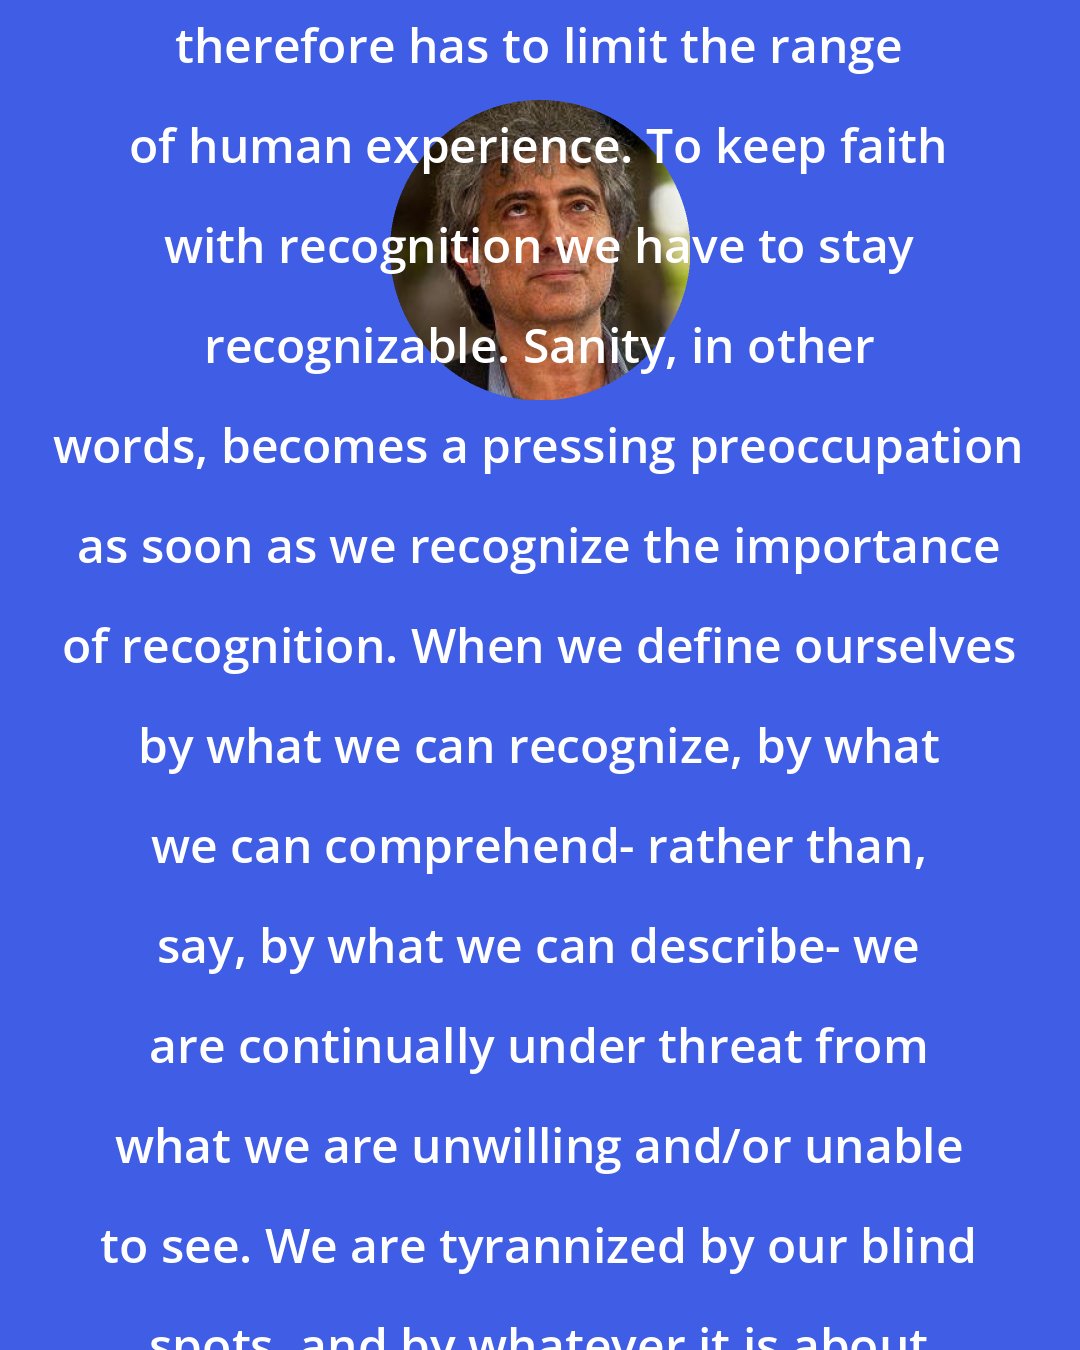 Adam Phillips: Sanity, as the project of keeping ourselves recognizably human, therefore has to limit the range of human experience. To keep faith with recognition we have to stay recognizable. Sanity, in other words, becomes a pressing preoccupation as soon as we recognize the importance of recognition. When we define ourselves by what we can recognize, by what we can comprehend- rather than, say, by what we can describe- we are continually under threat from what we are unwilling and/or unable to see. We are tyrannized by our blind spots, and by whatever it is about ourselves that we find unacceptable.